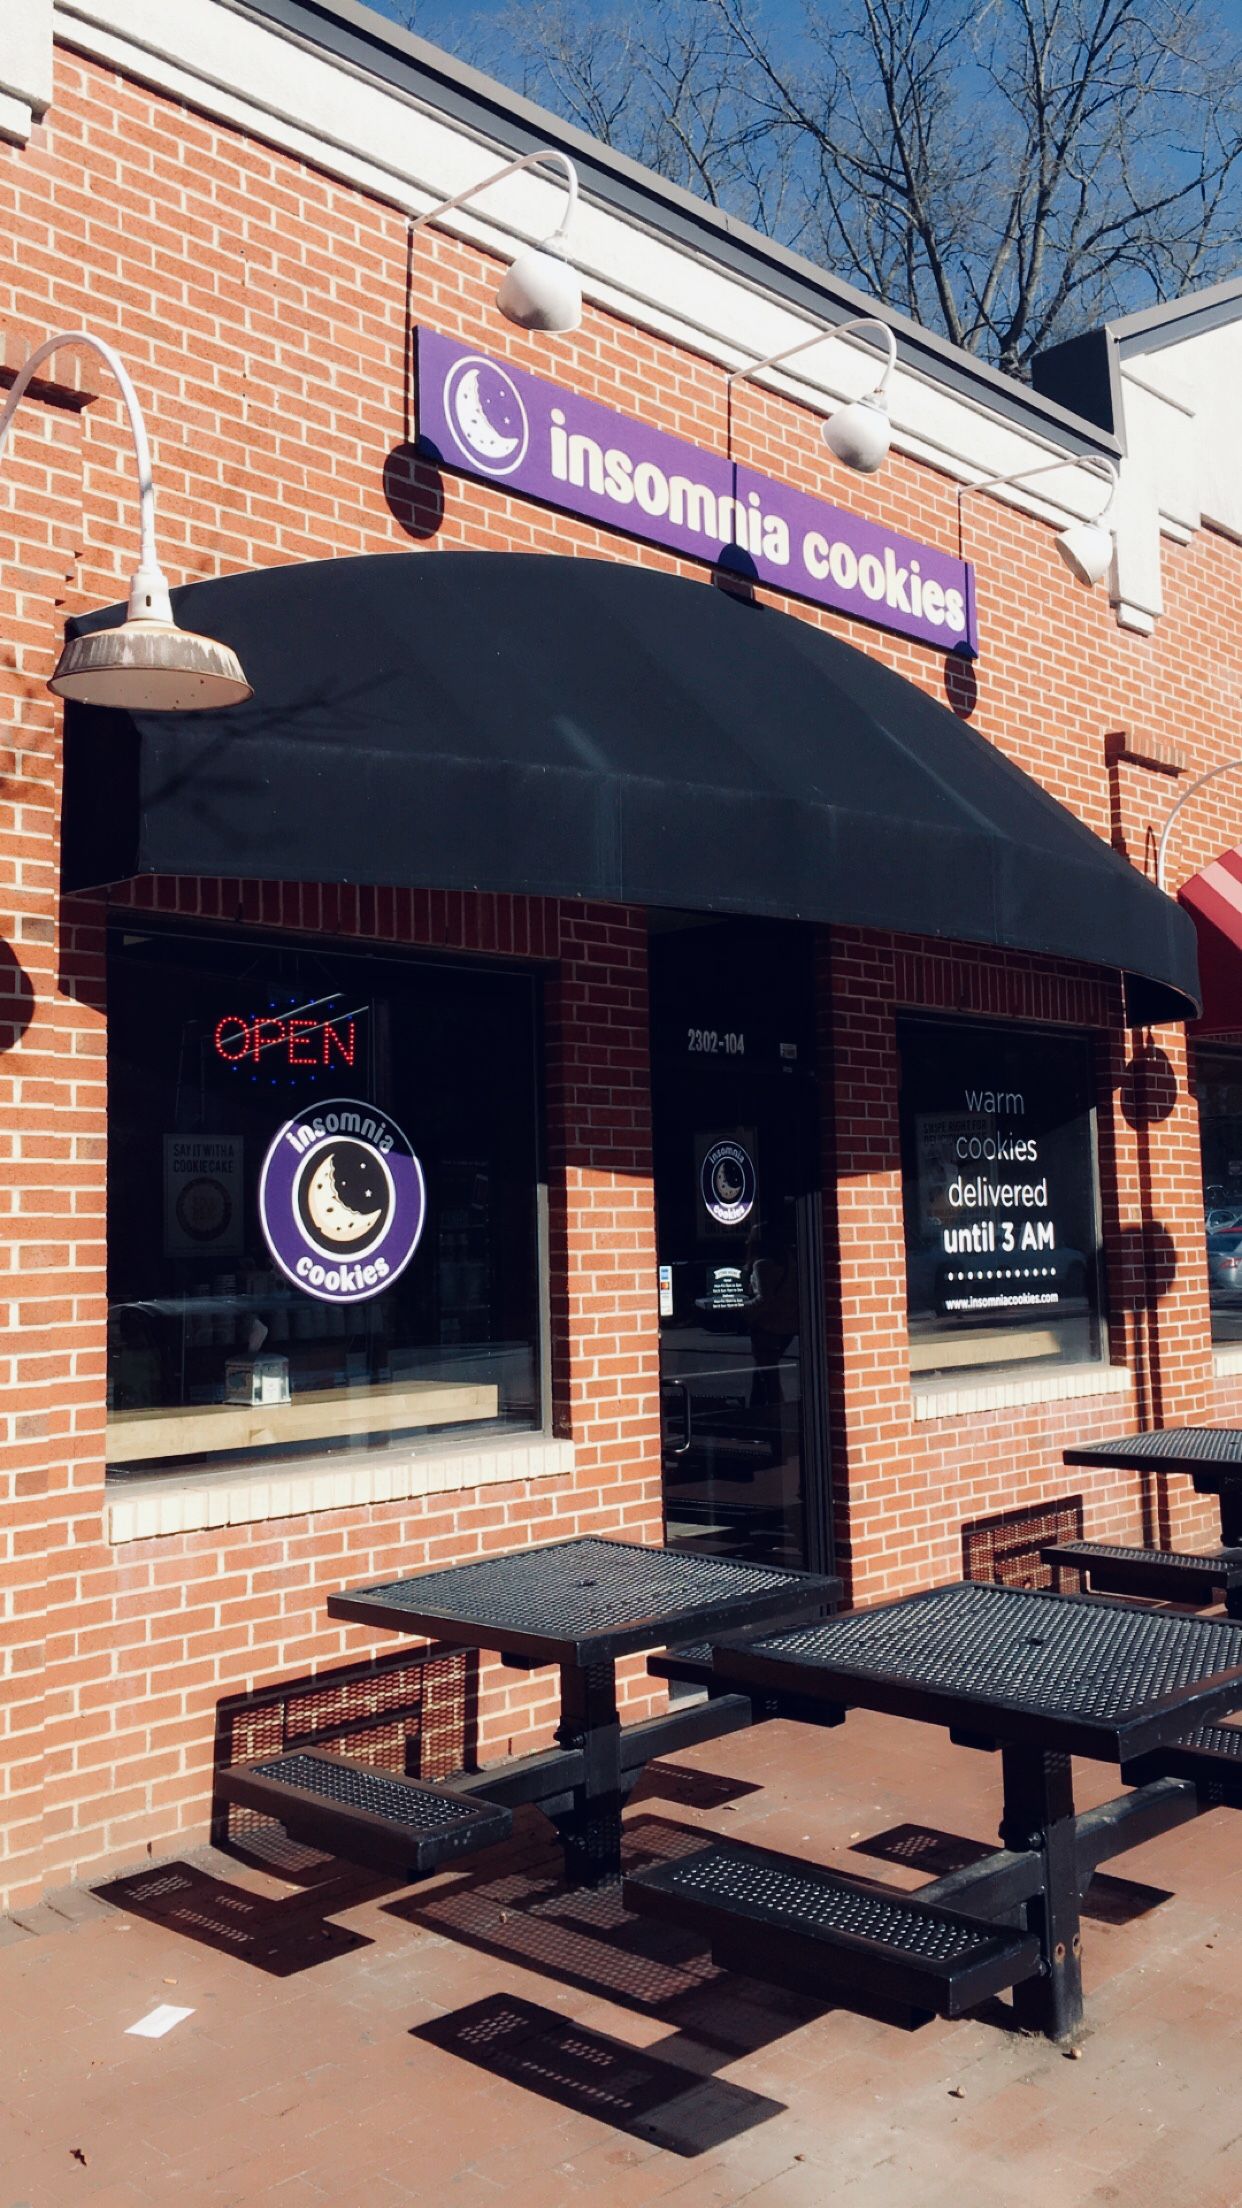 Tasty Tuesday: Insomnia Cookies